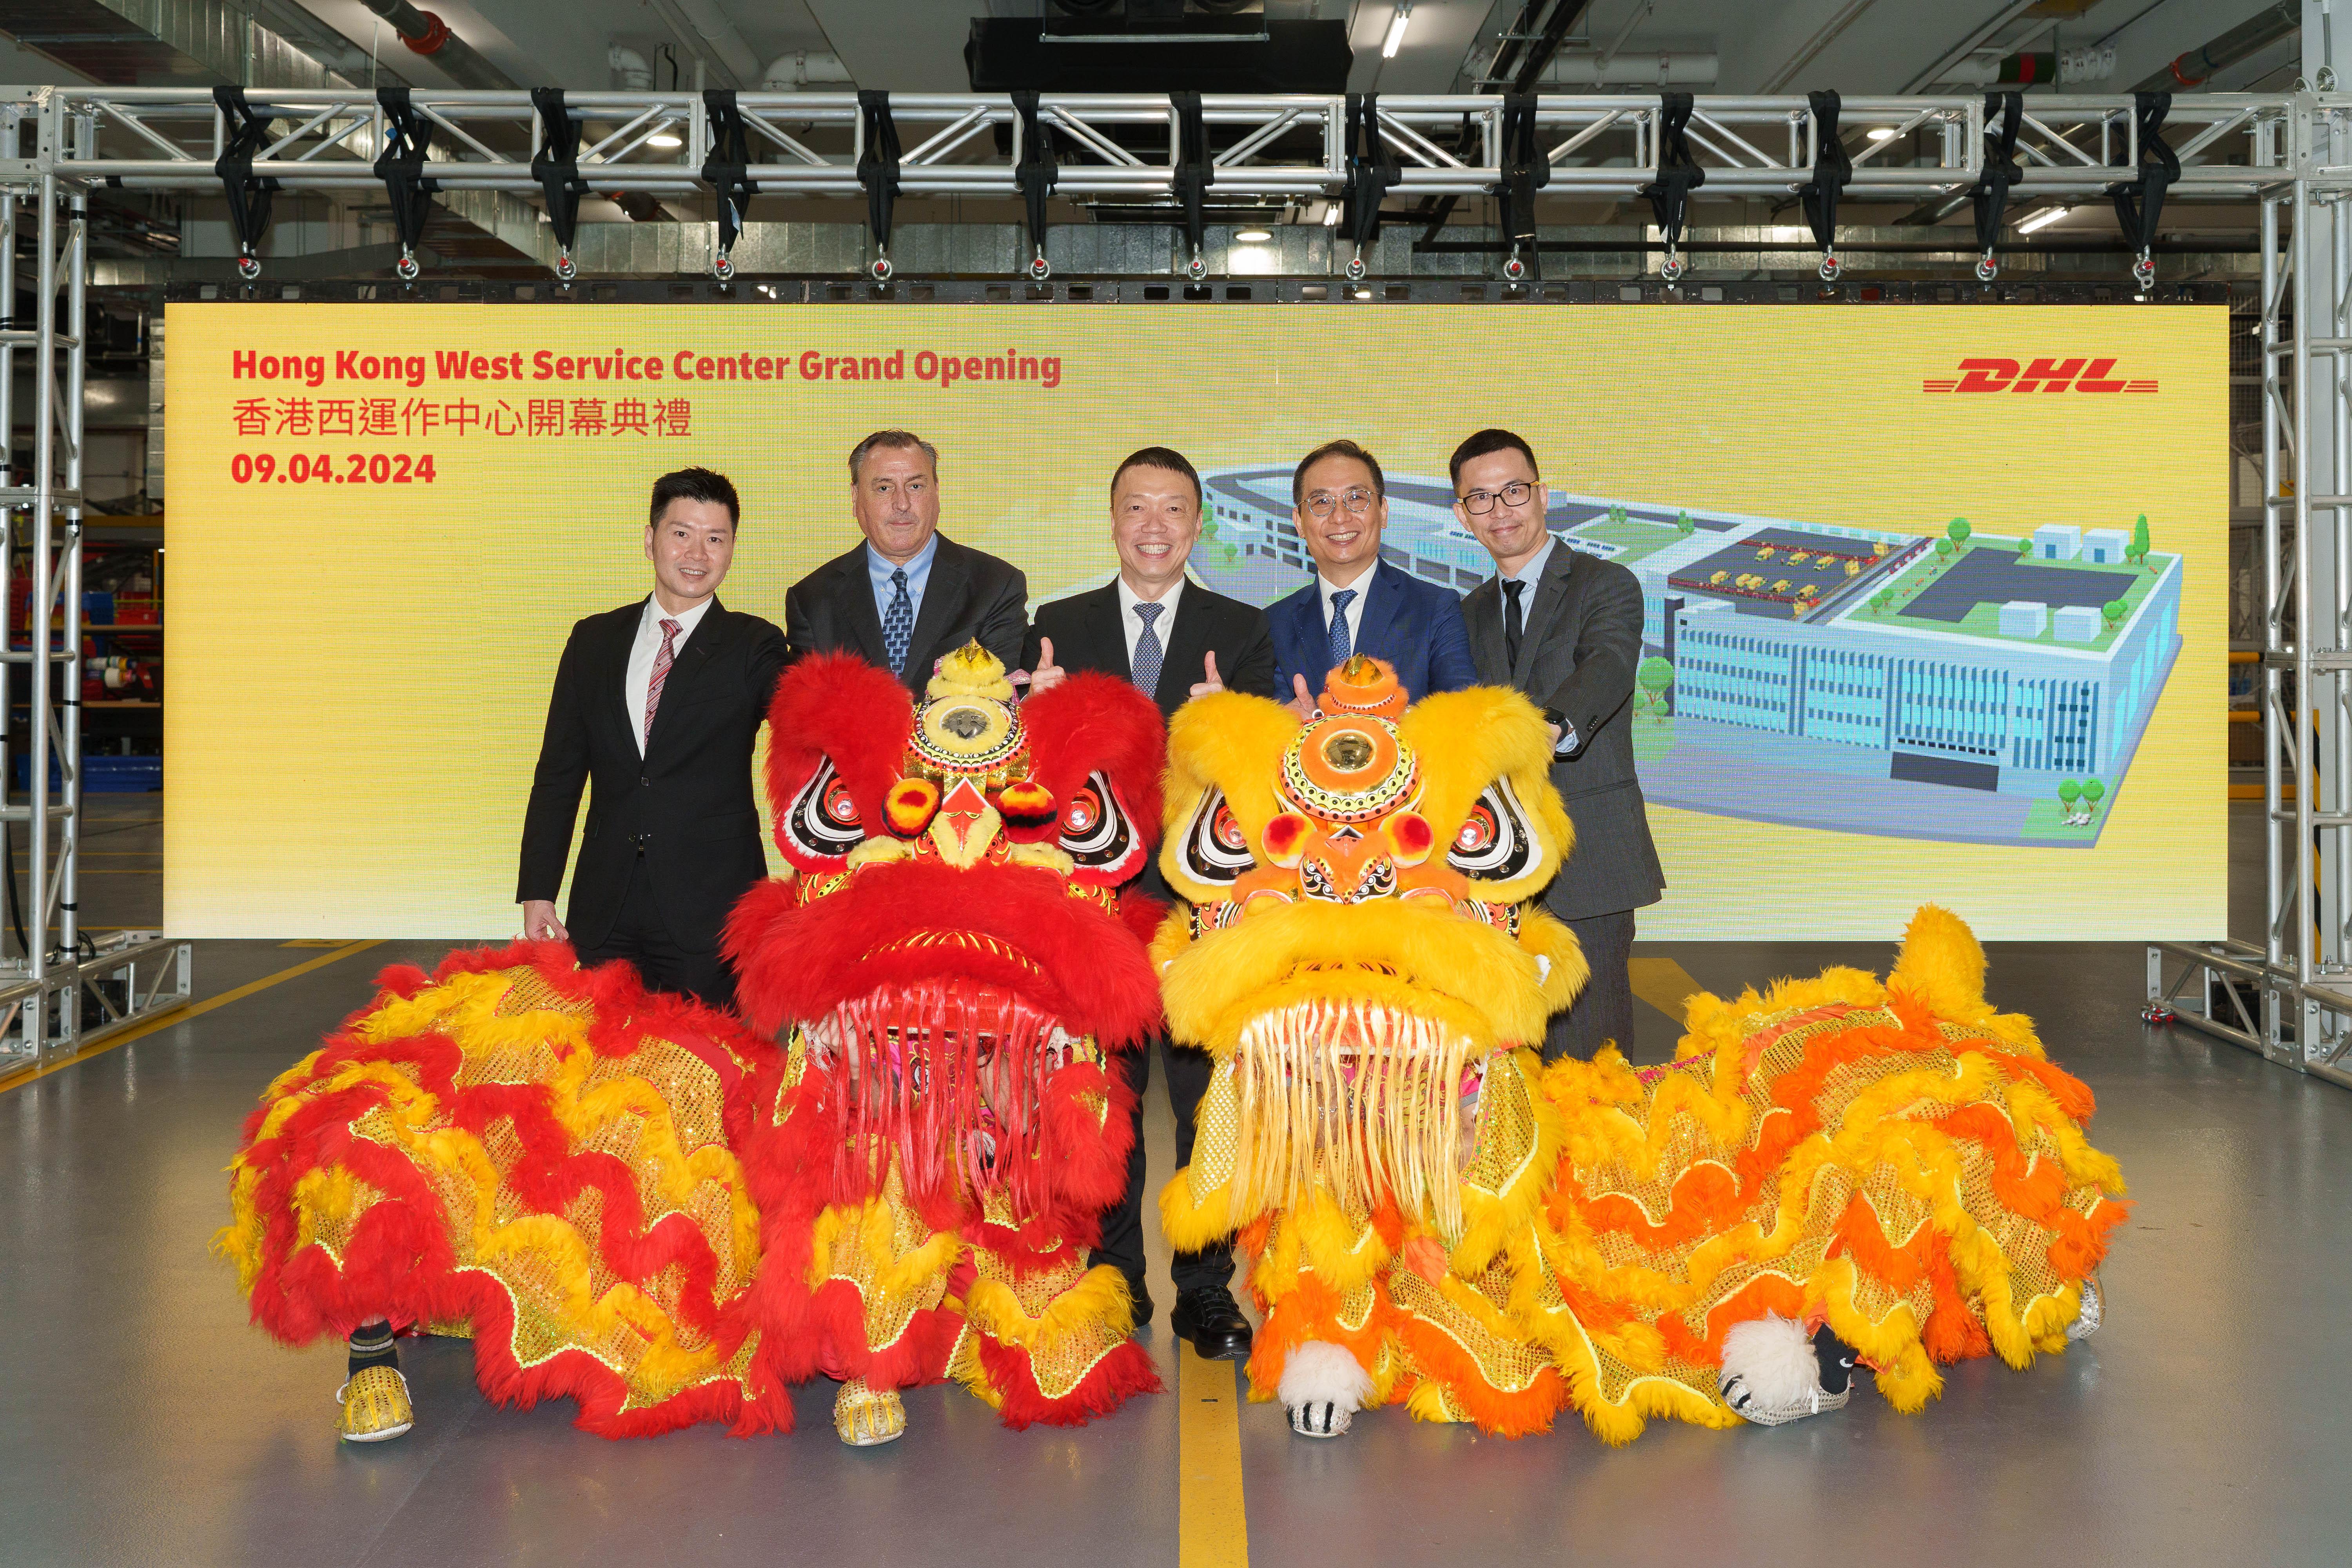 DHL Express today announces the launch of the DHL Express Hong Kong West Service Center (KWC). With an investment of HKD$1.5 billion, the new fully automated, eco-friendly facility substantiates DHL